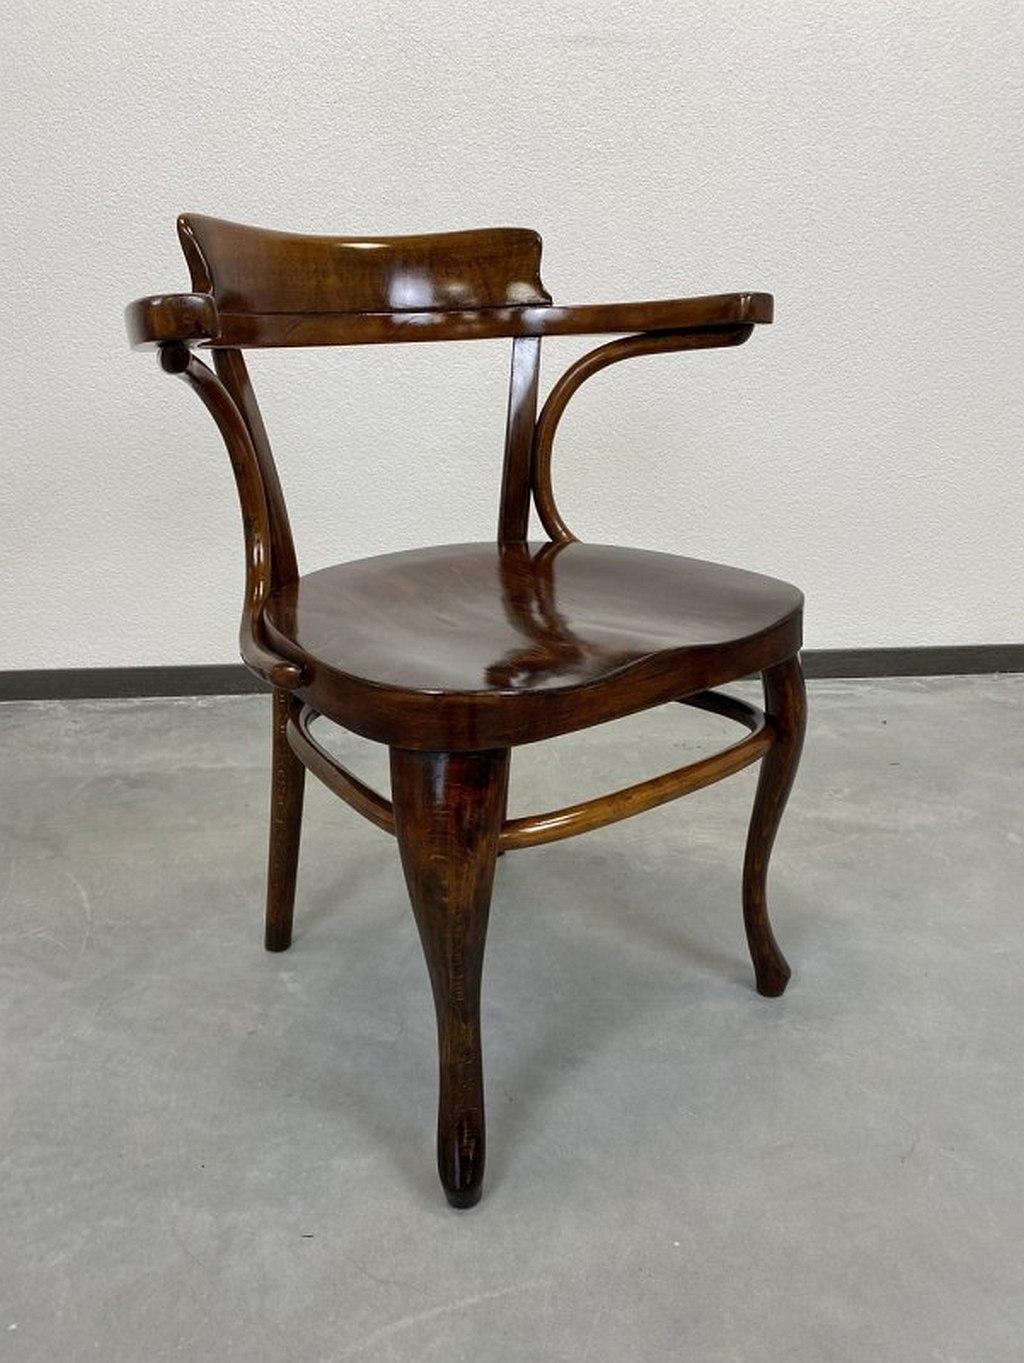 Secession office chair no.6150 by Adolf Loos executed by Thonet. Professionally stained and repolished.